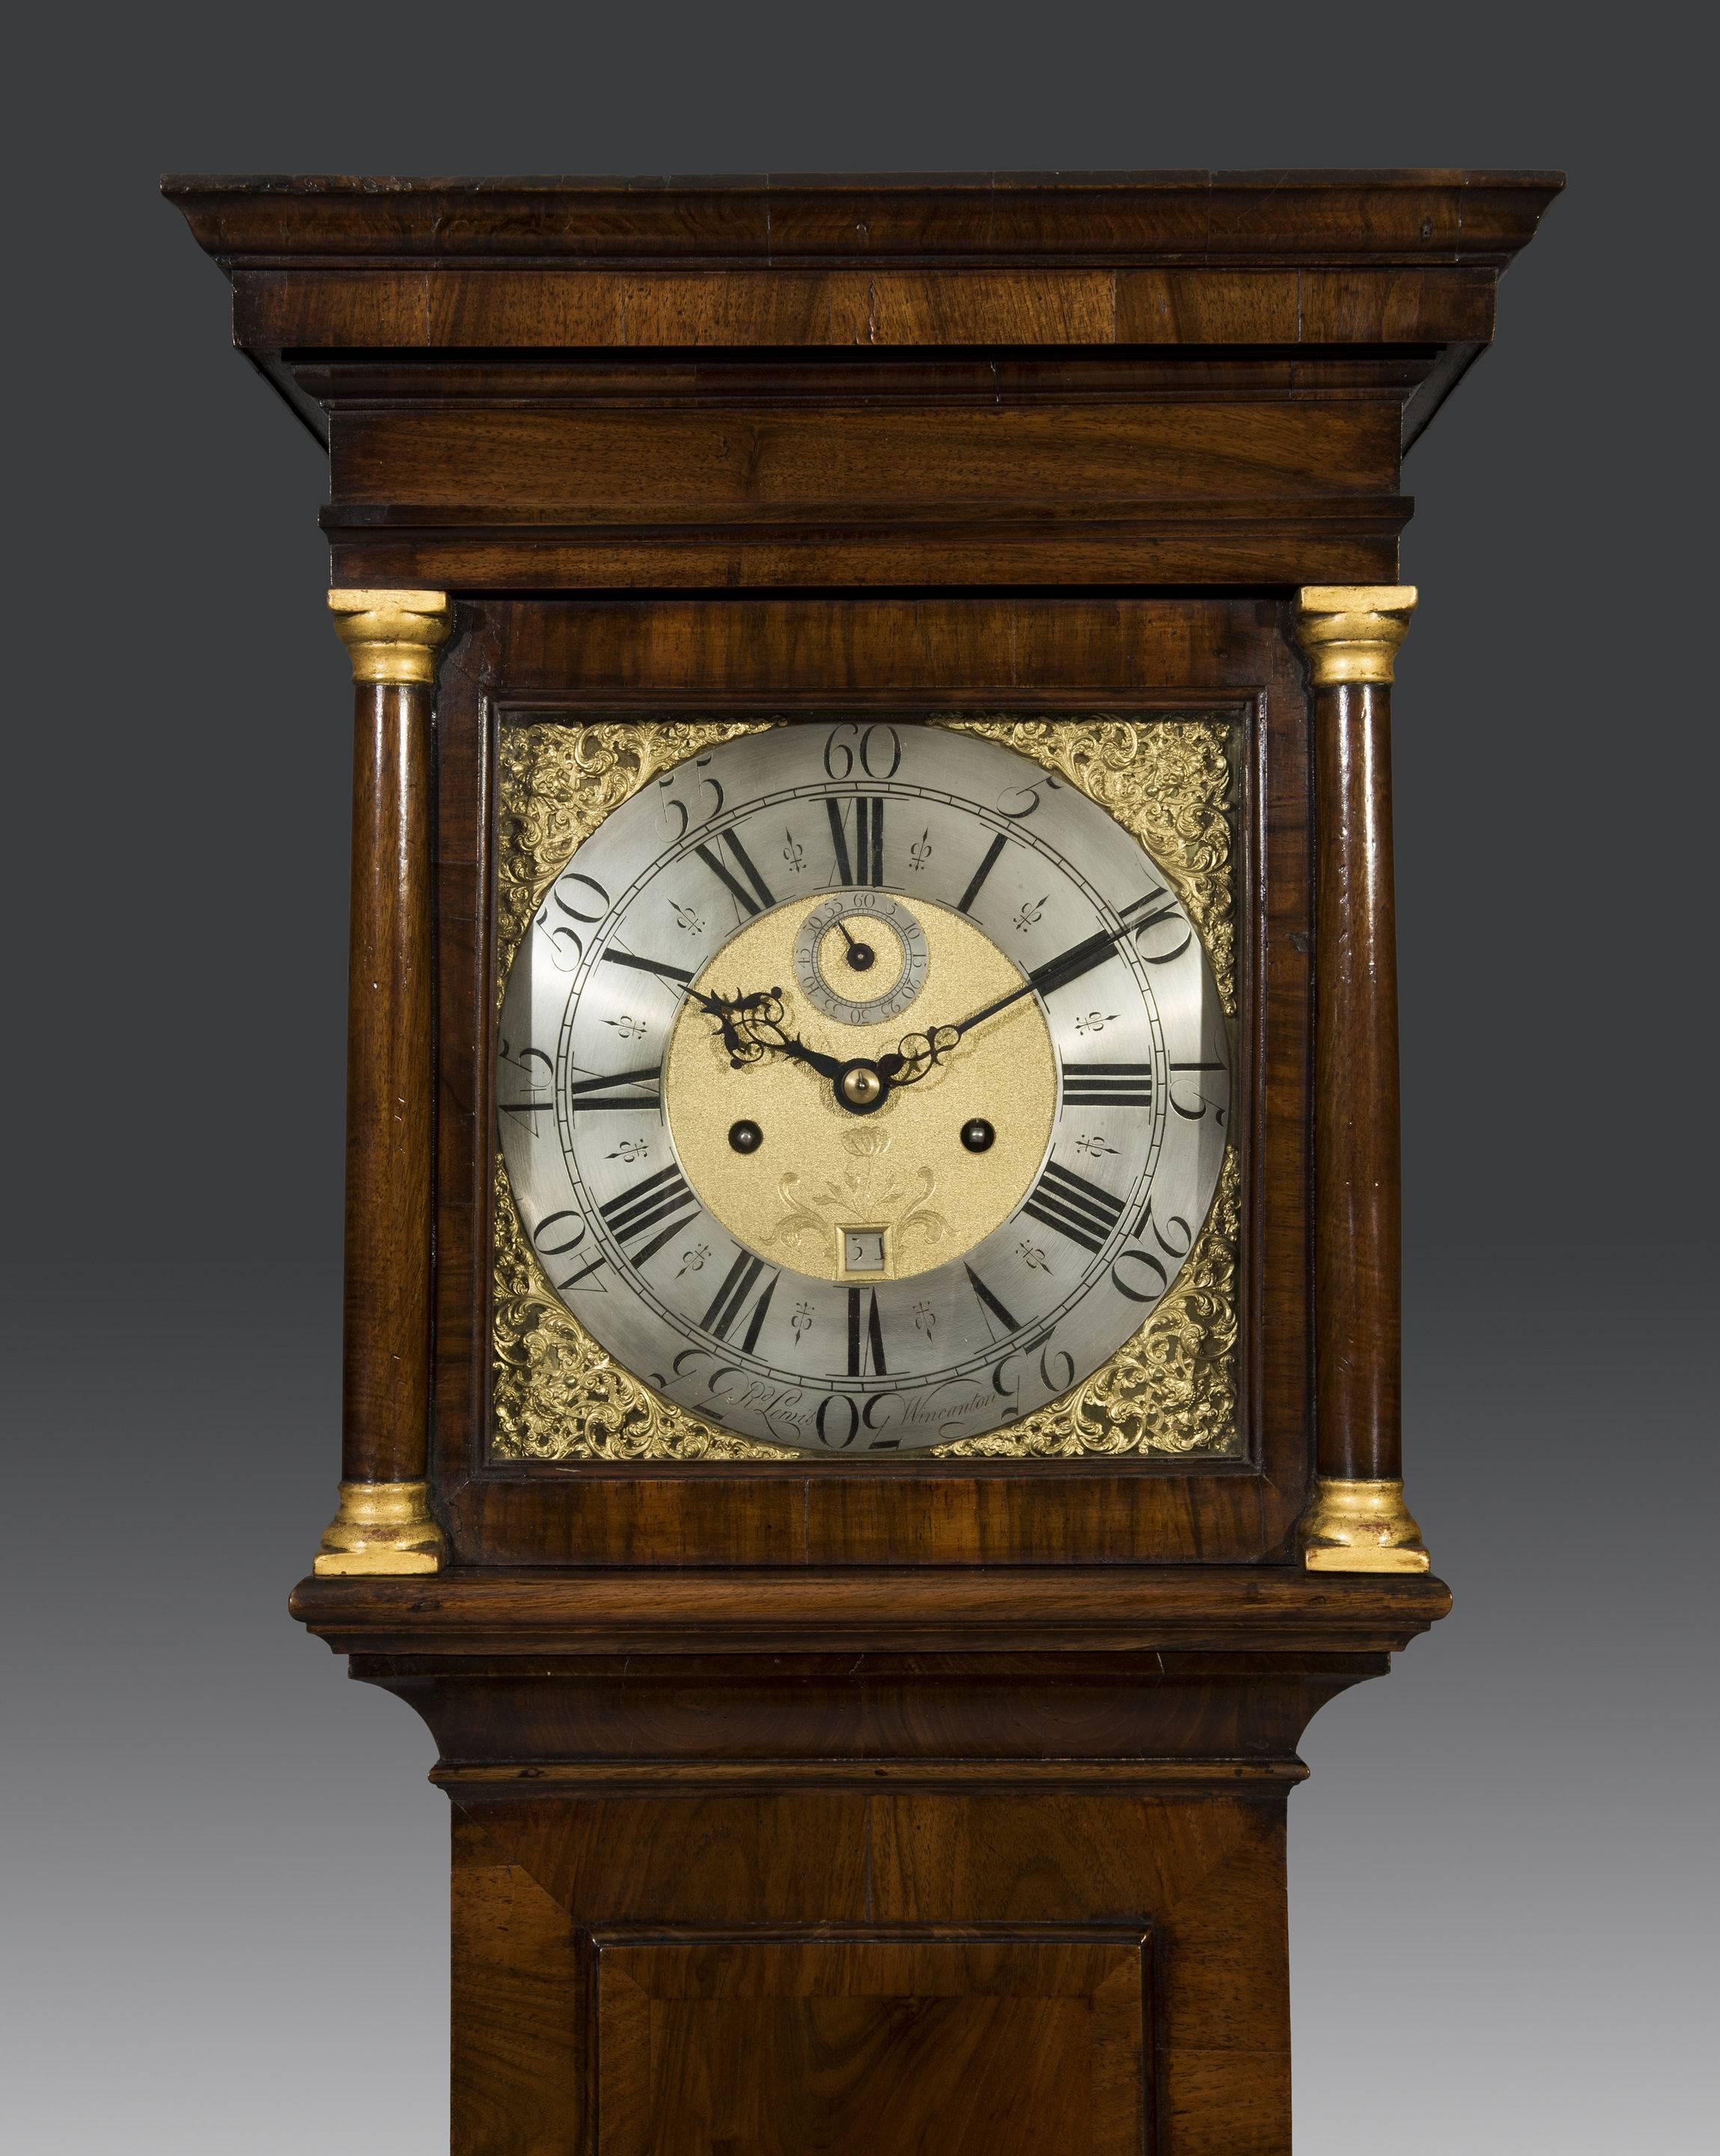 The walnut brass dial 8 day longcase clock by Richard Lewis of Wincanton is of slender elegant proportions and retains a warm golden colour. The five pillar movement strikes the hour on a bell and is mounted on a rare 11” brass dial with a silver